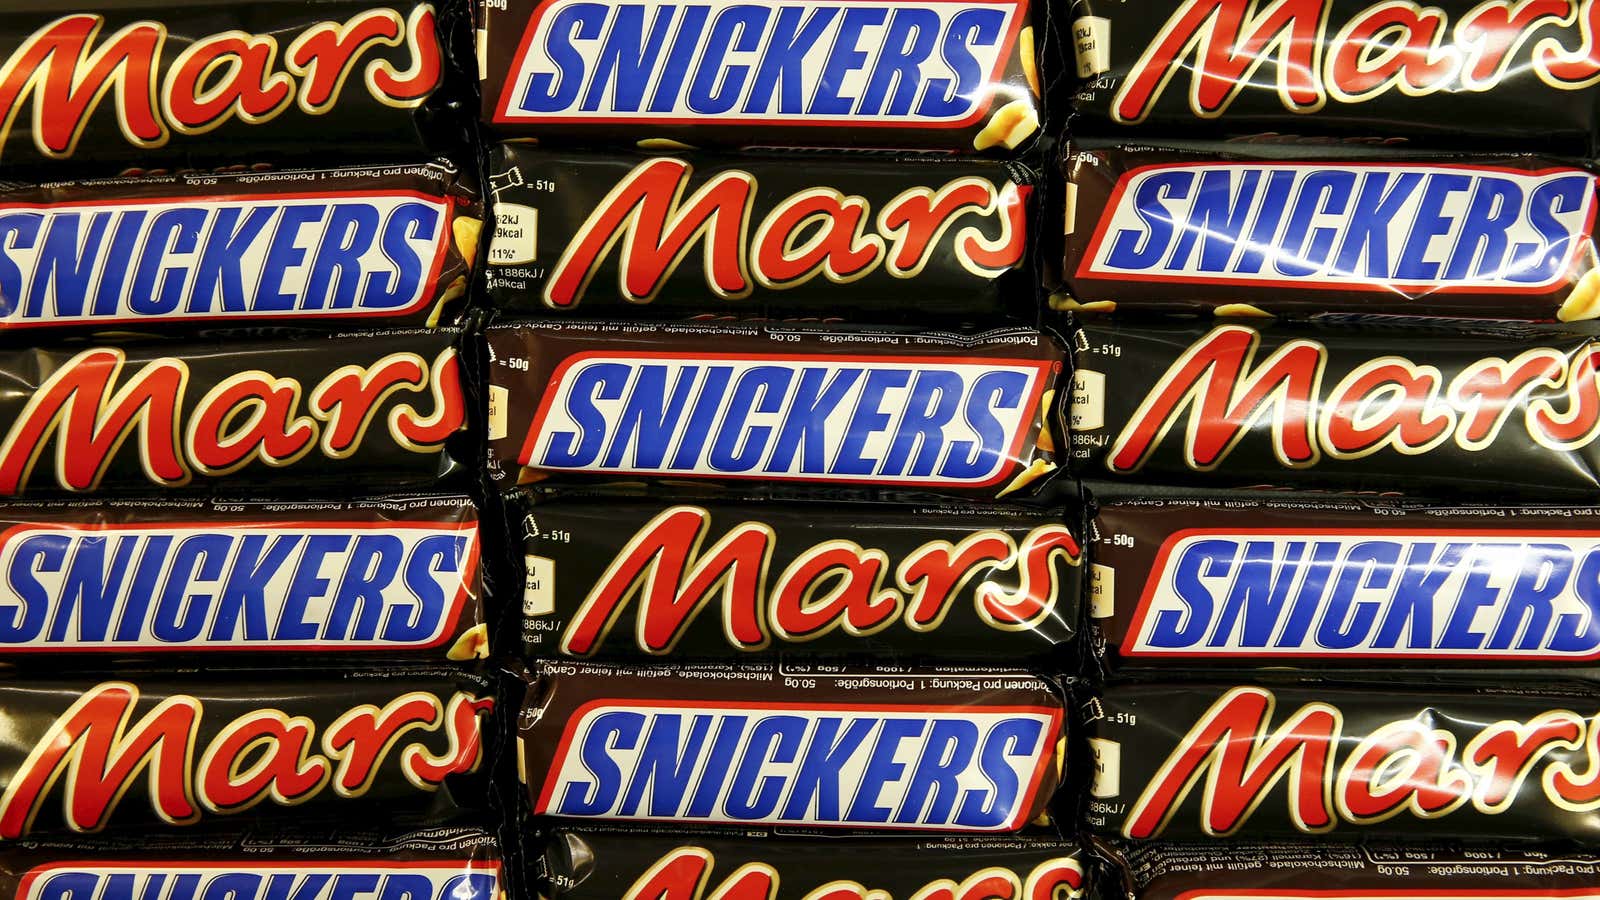 Mars decided to voluntarily recall its products after plastic was found in a Snickers bar.